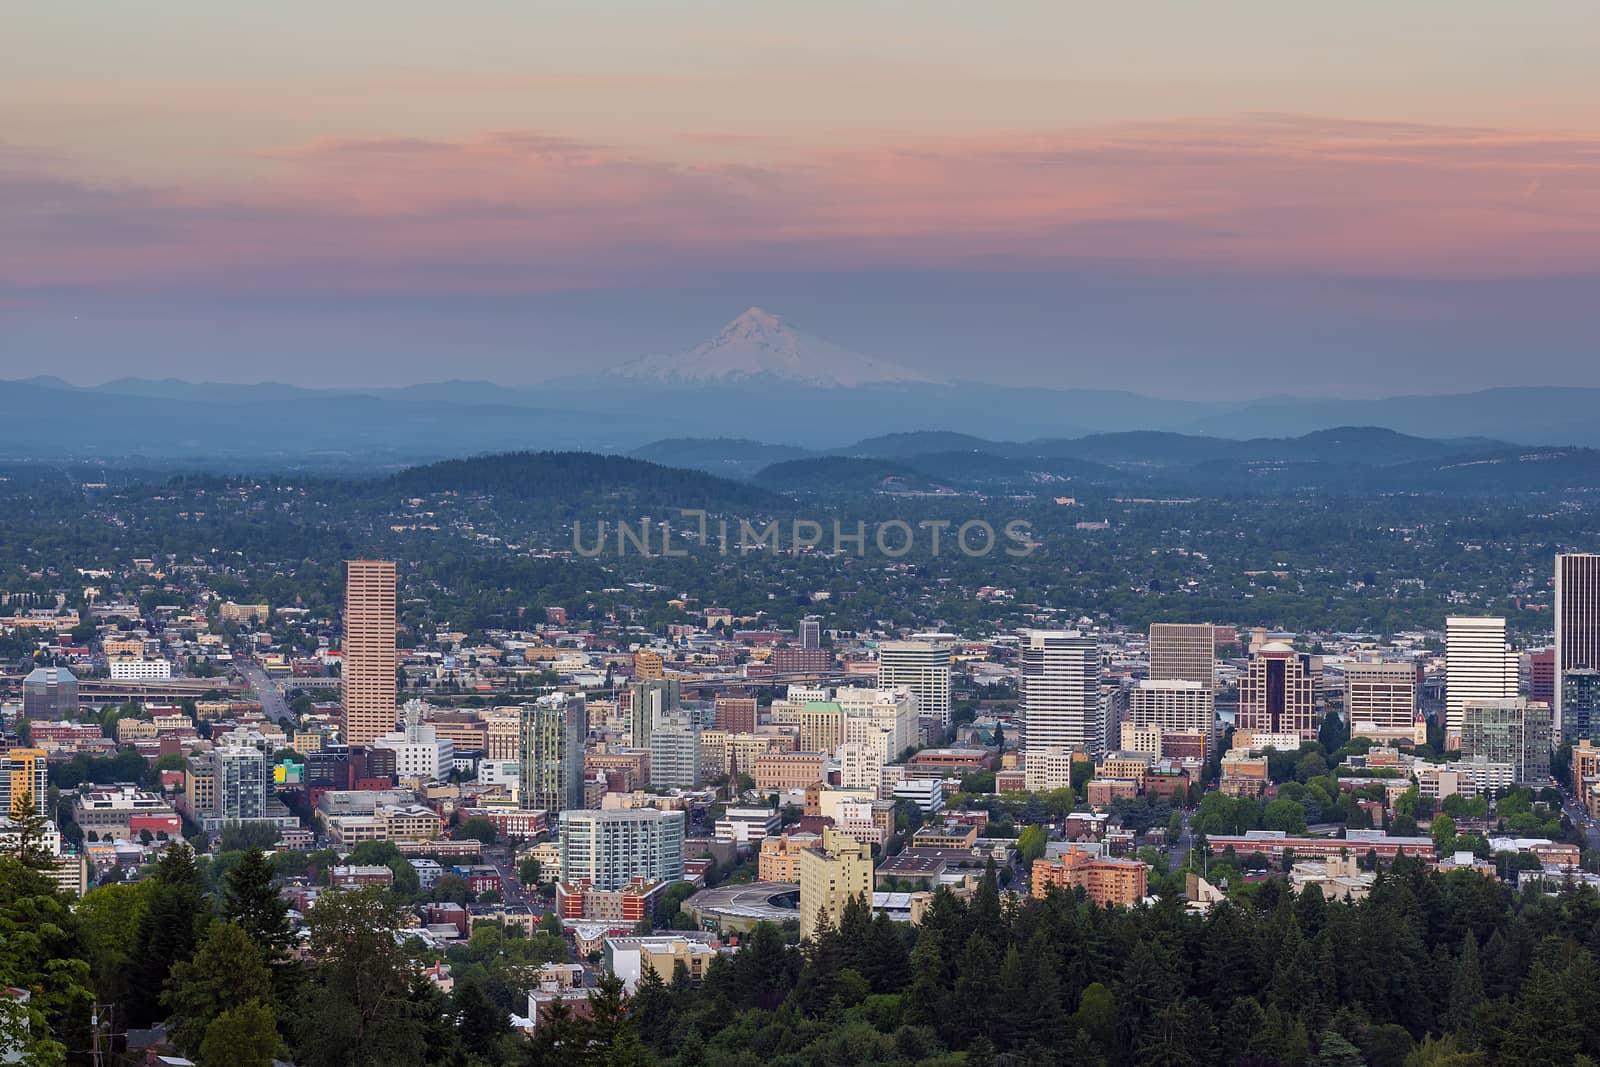 Alpenglow over Mount Hood and cityscape of downtown Portland Oregon after sunset